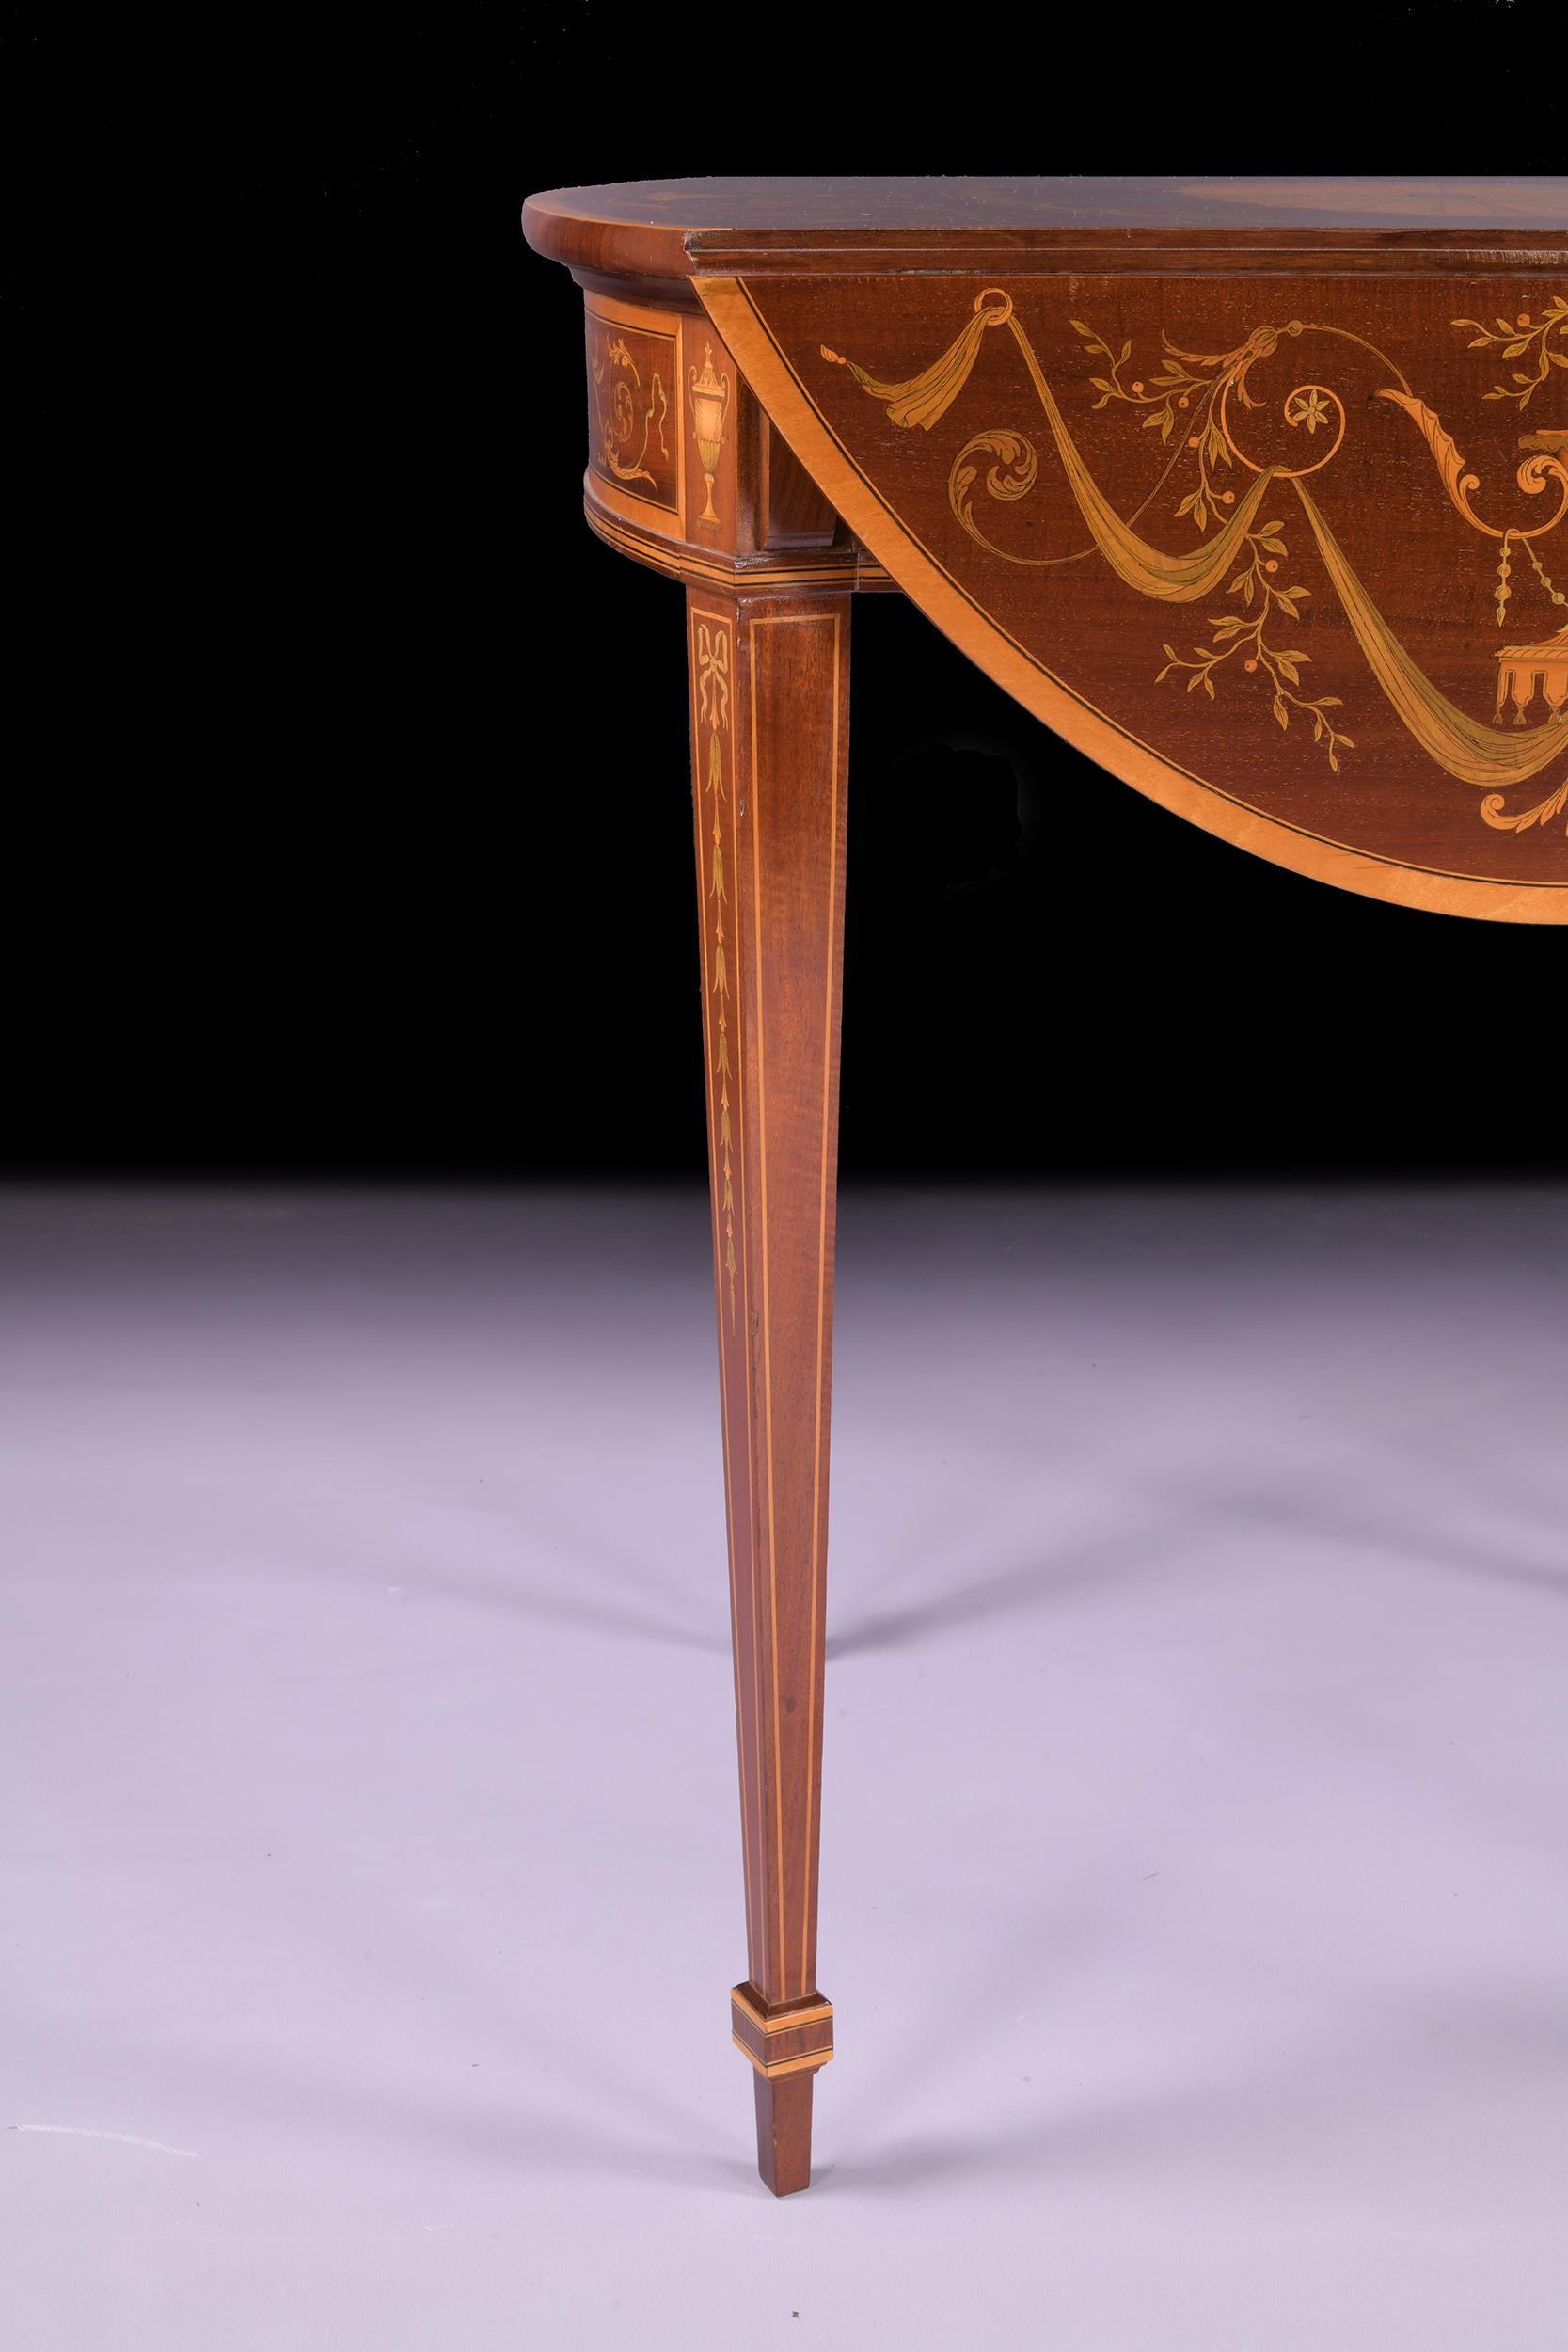 Late 19th Century English Edwardian Satinwood Pembroke Table By Edwards & Robert For Sale 4